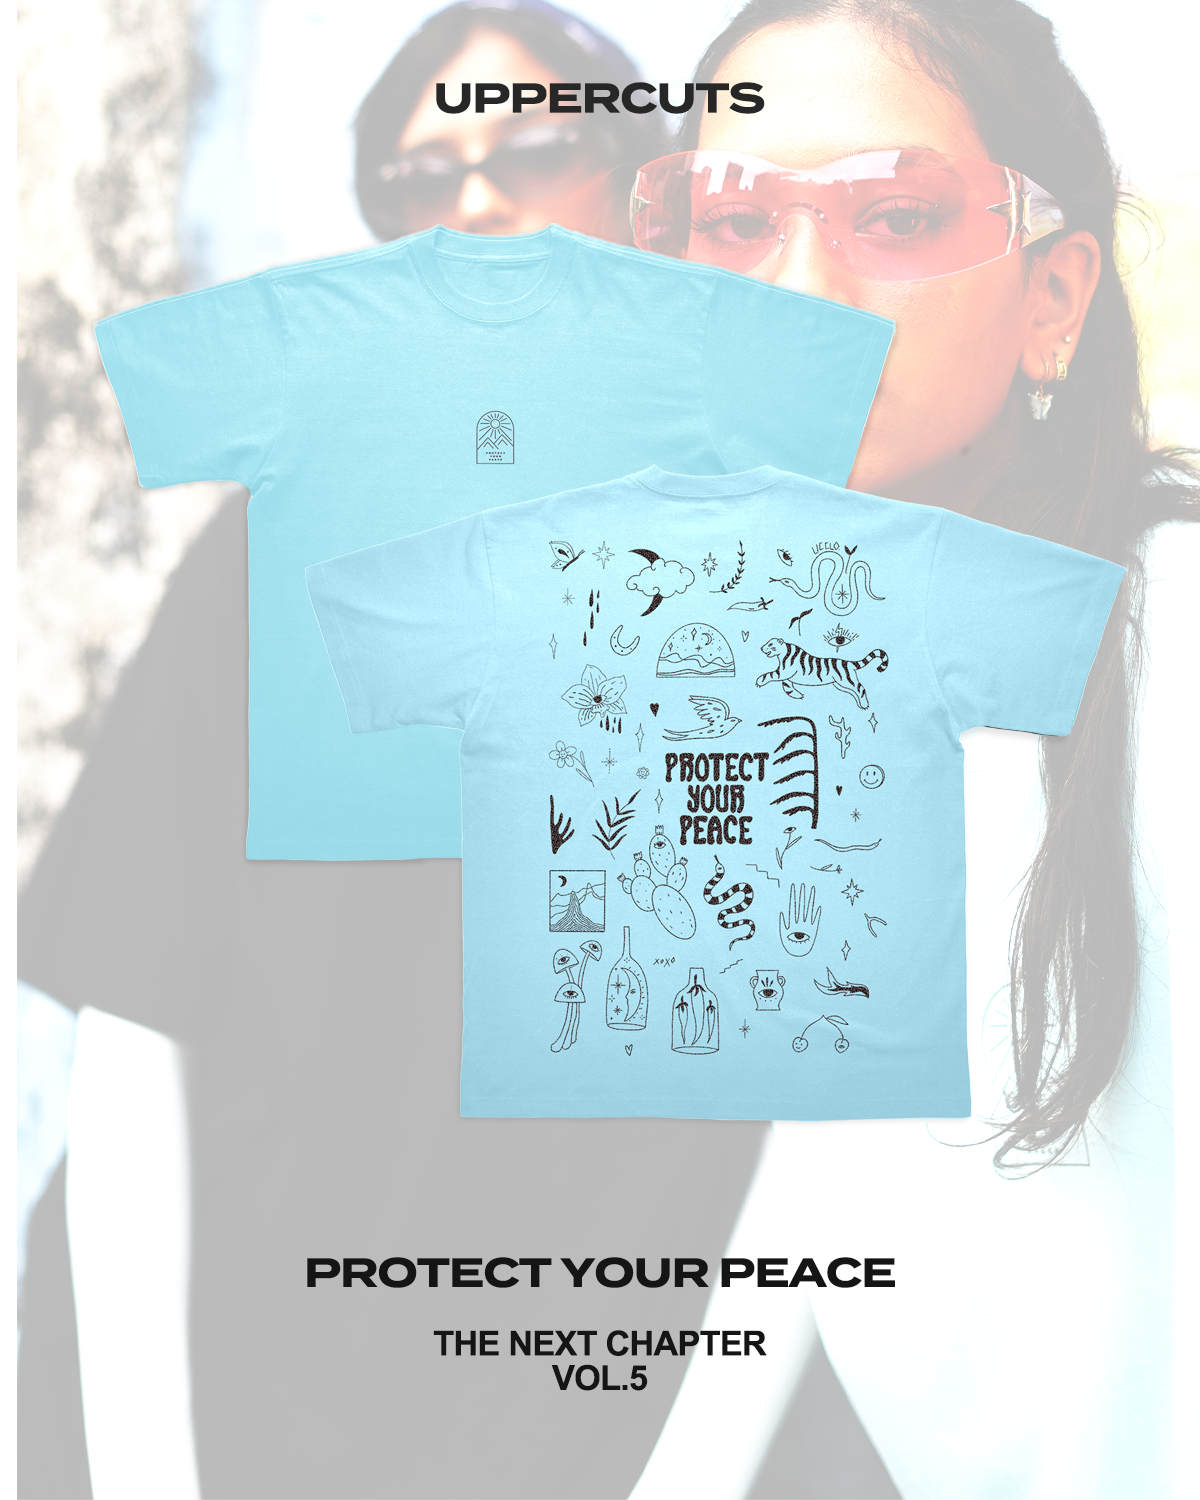 "Protect Your Peace"